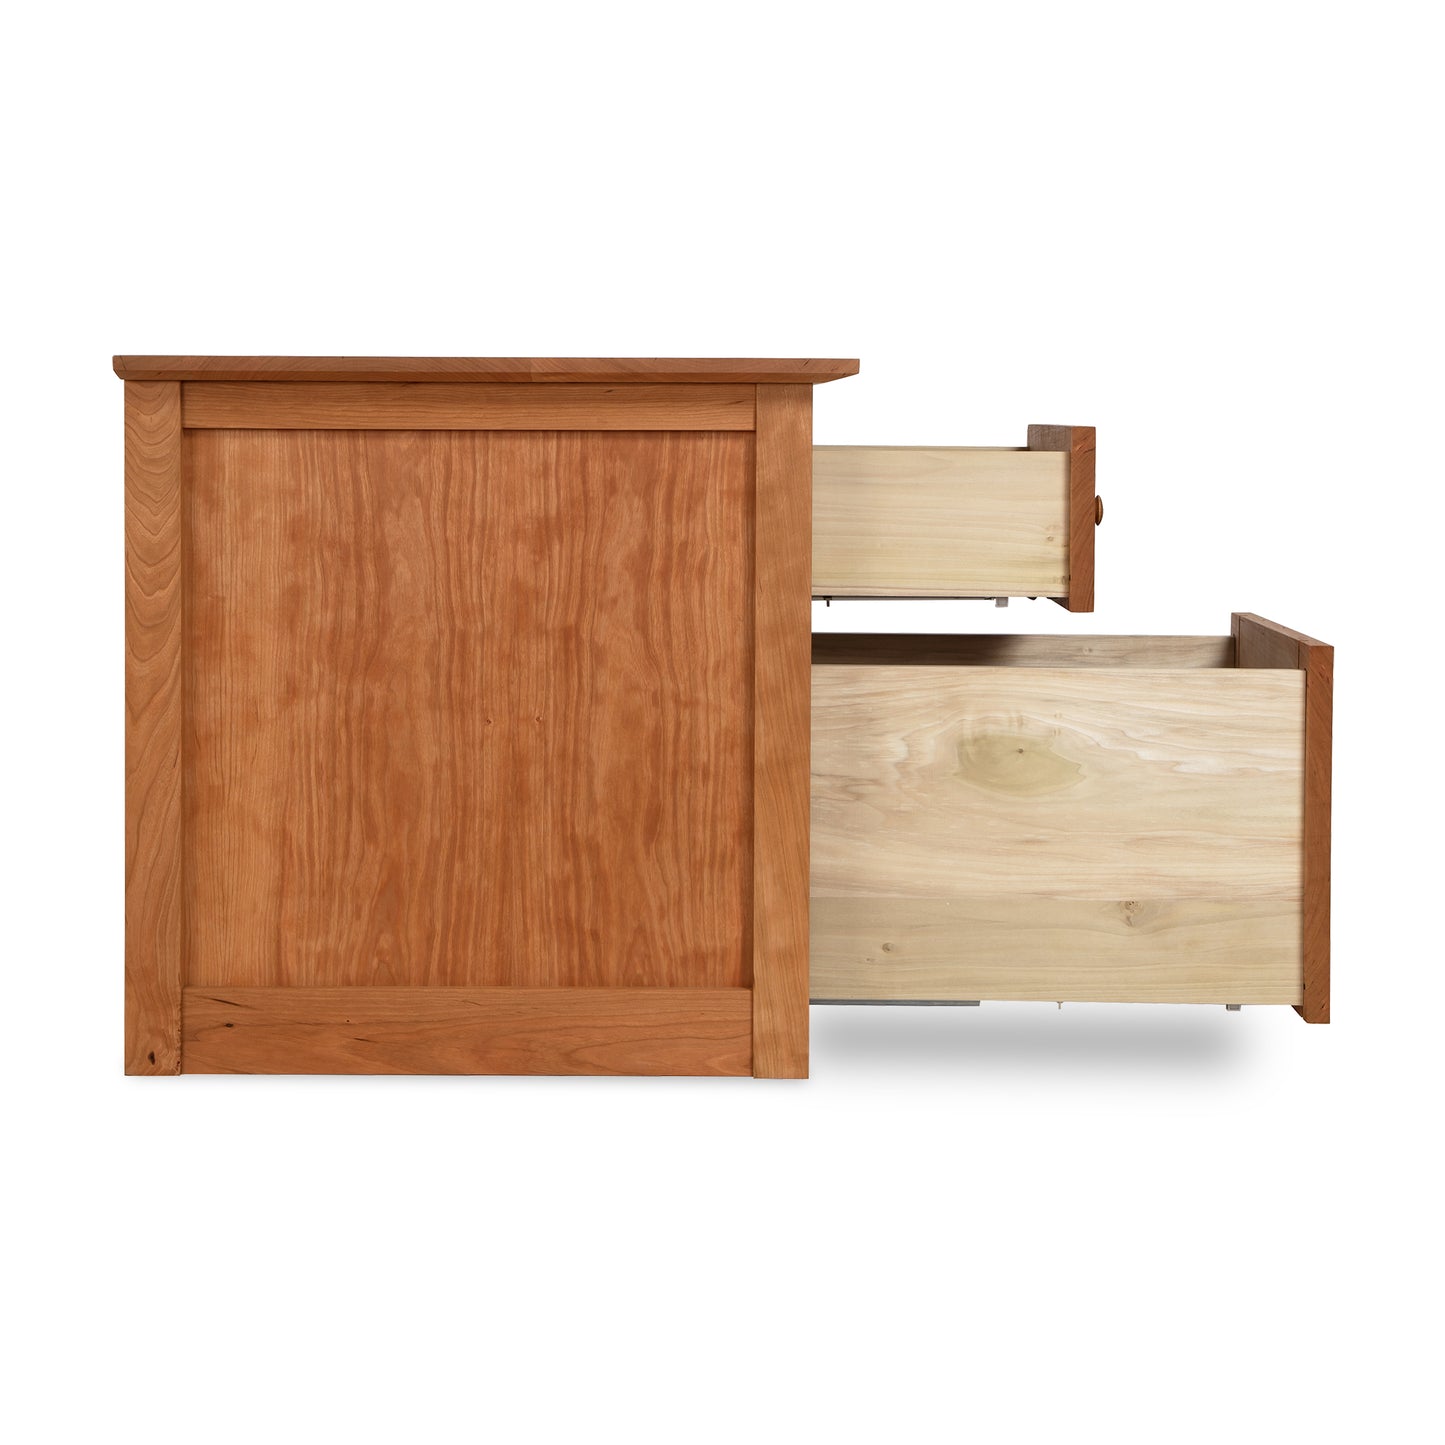 Wooden bed frame partially disassembled, showcasing headboard and side components, against a white background with a Maple Corner Woodworks American Shaker File Cabinet adjacent.